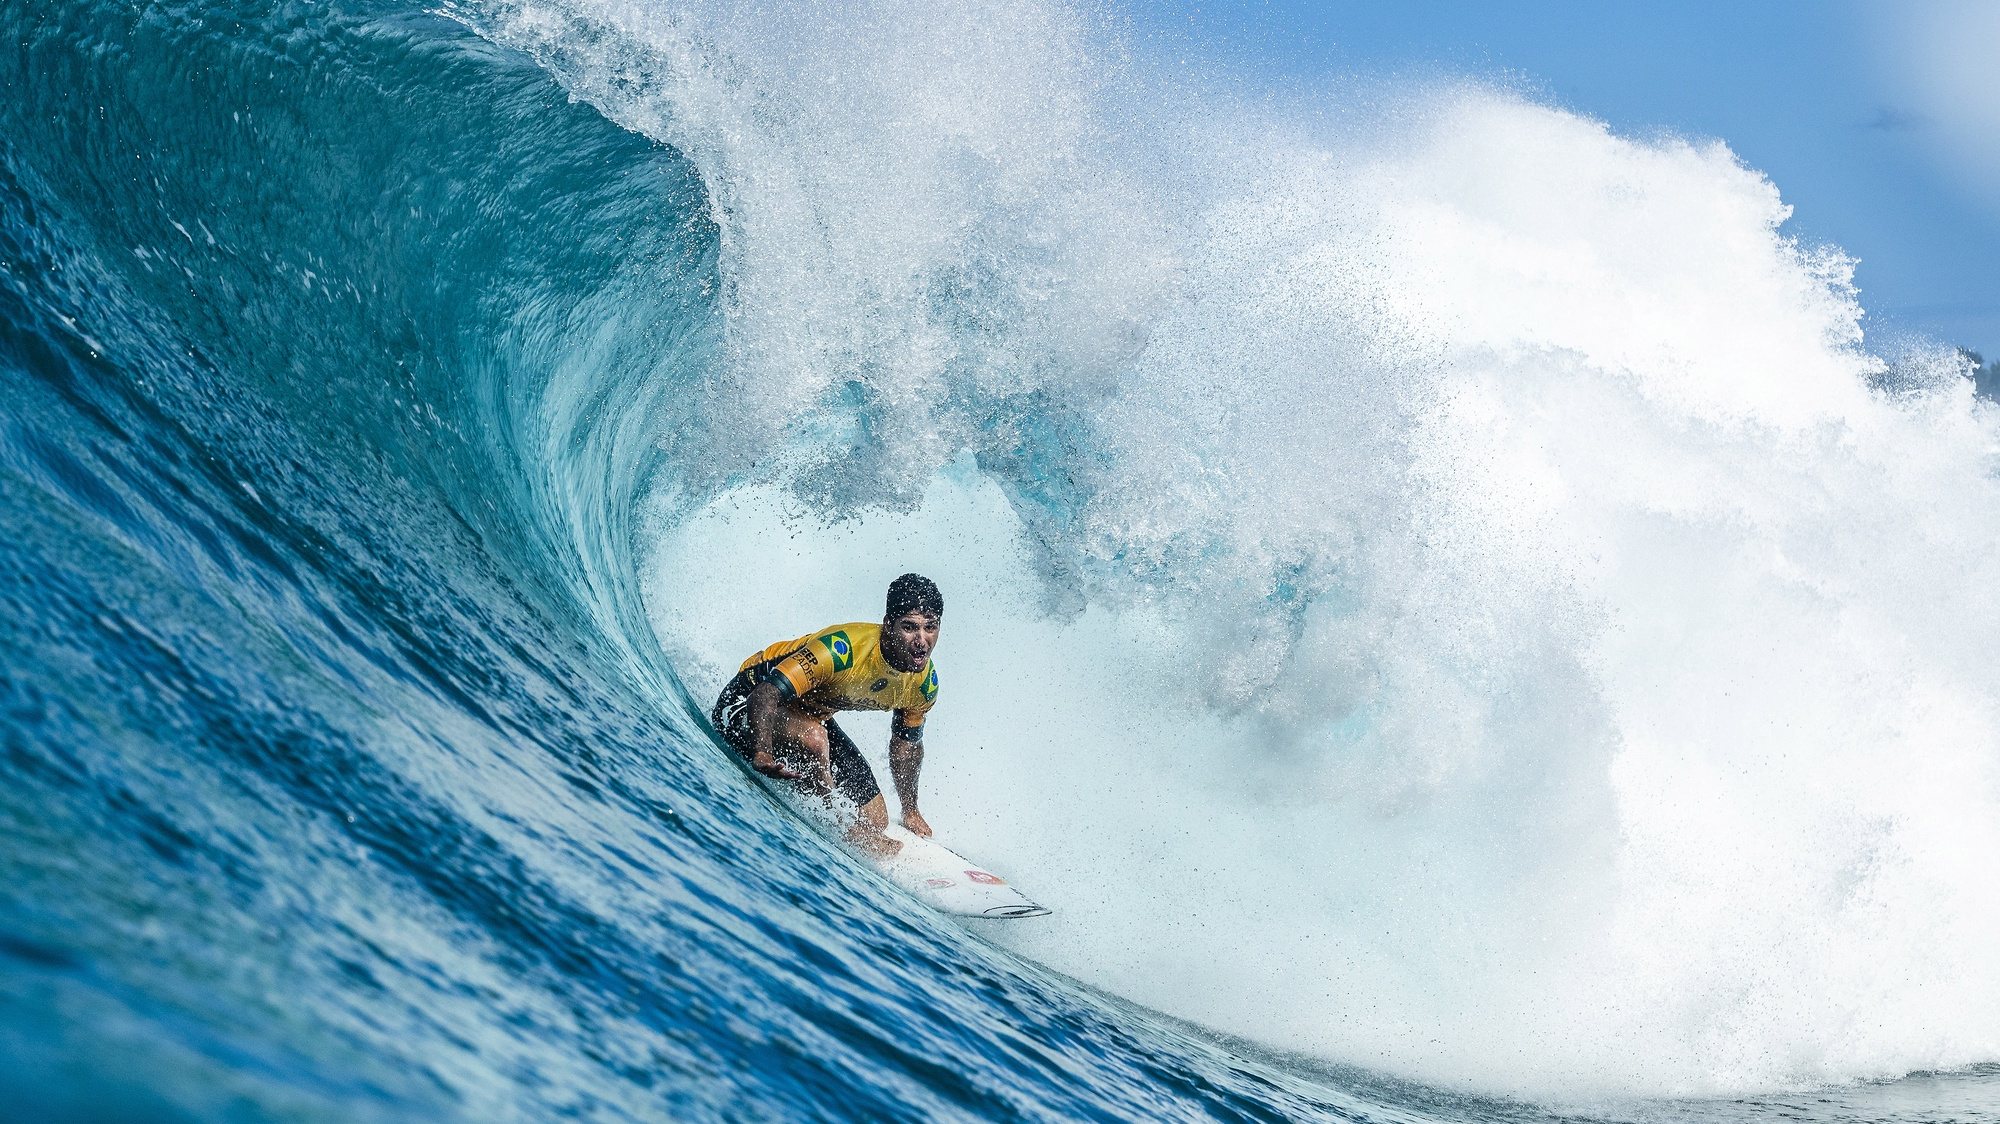 epa07238169 A handout photo made available by the World Surf League (WSL) Gabriel Medina of Brazil competing in the semi final of the season-ending Billabong Pipe Masters at Banzai Pipeline, Pupukea, Oahu island, Hawaii, USA, 17 December 2018. Medina went on to win the event and became world champion.  EPA/KELLY CESTARI - WSL HANDOUT  HANDOUT EDITORIAL USE ONLY/NO SALES